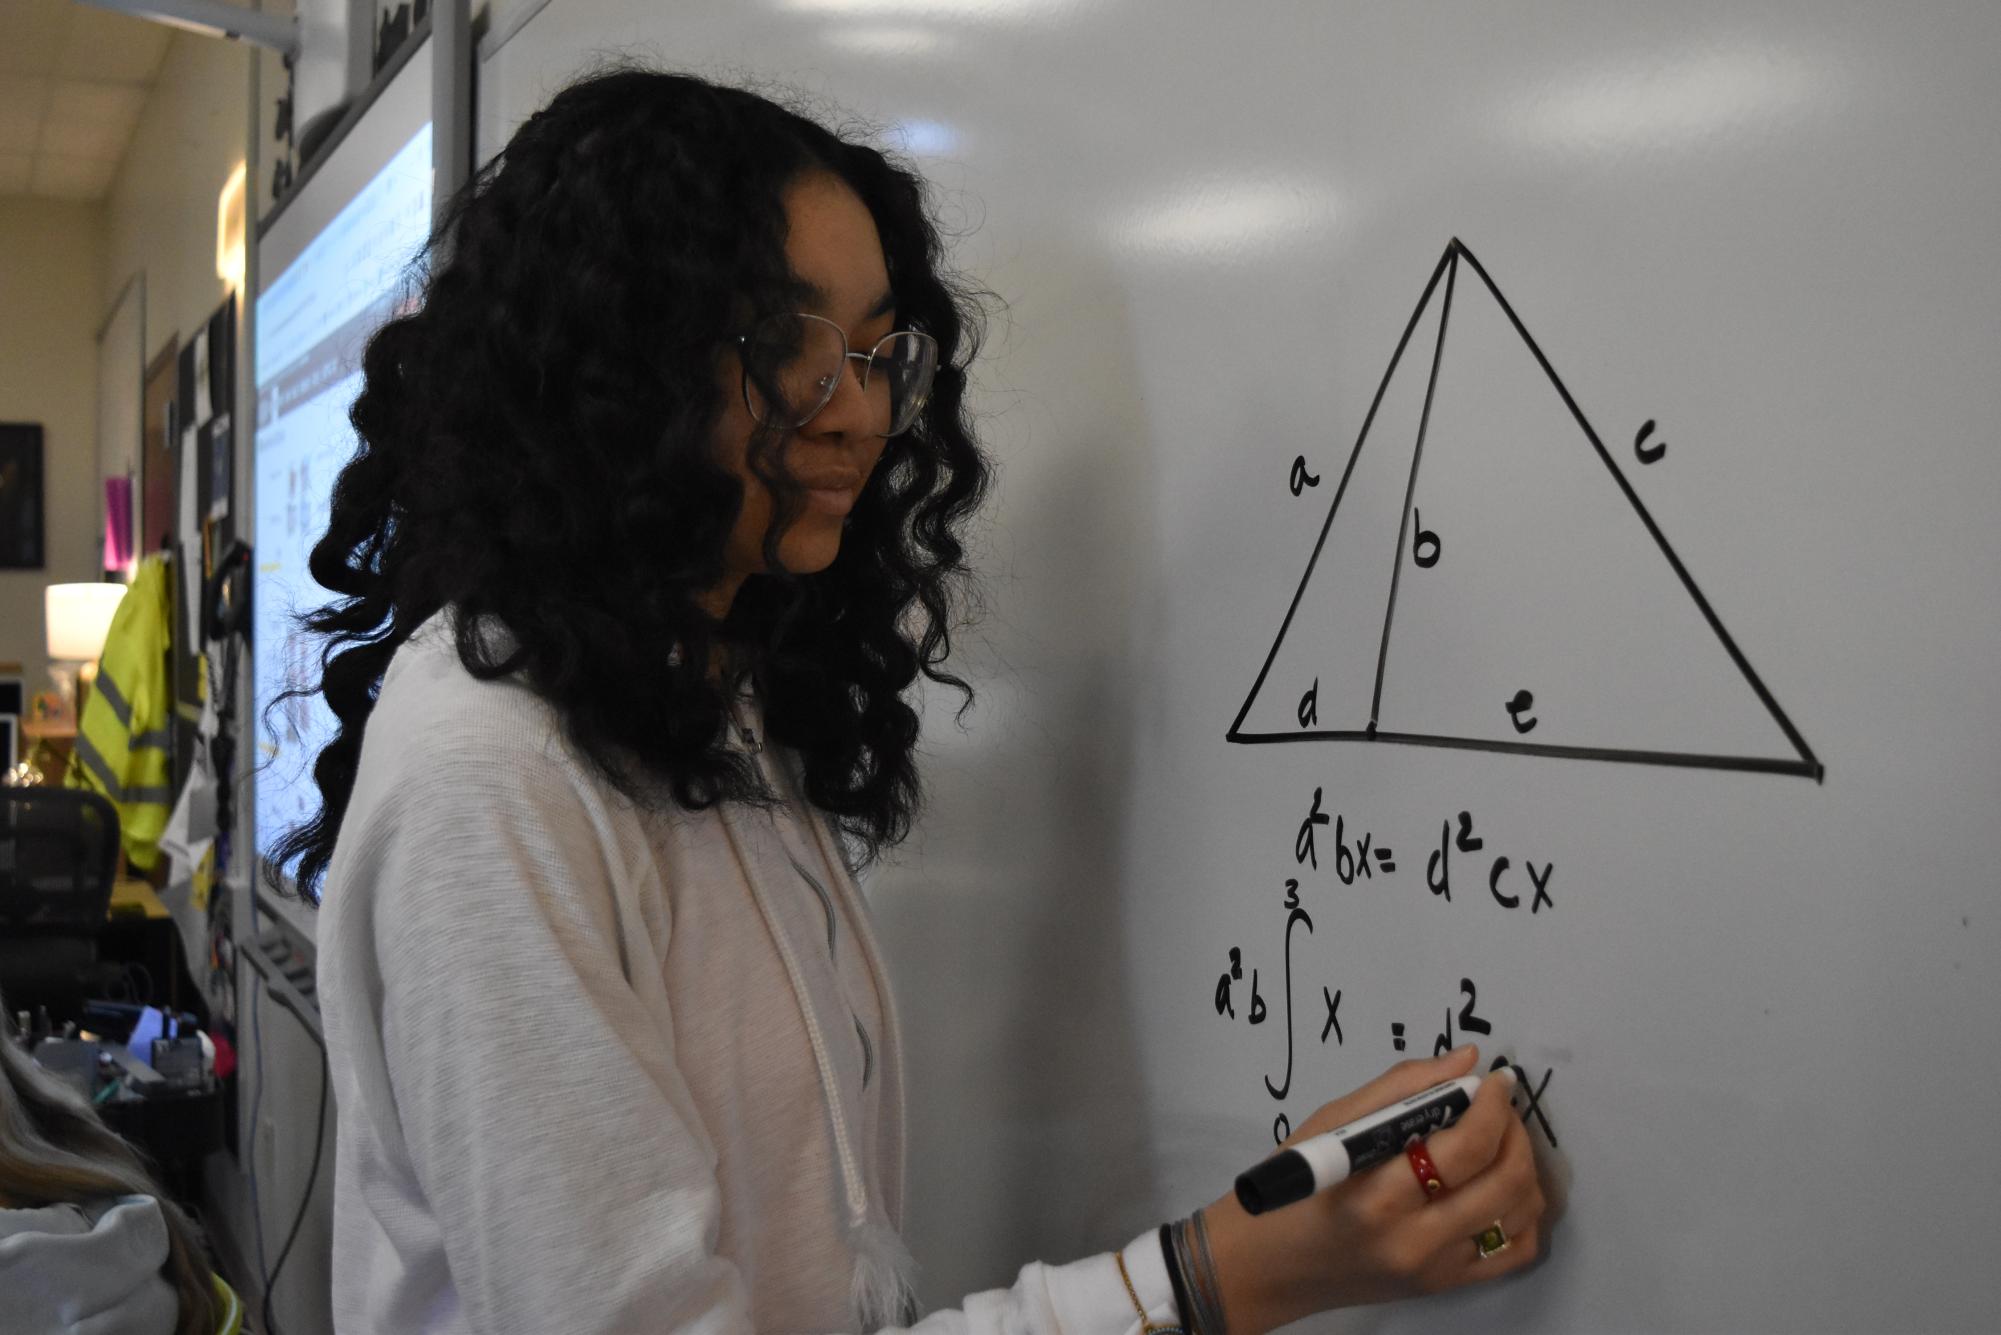 Senior Sakenah Lajkem solves a math competition problem involving geometry. In her AP Calculus BC class, Lajkem noticed there were more female student tutors than male student tutors. “Growing up I did not really notice a disparity between male and female students, at least in school academics. In fact, teachers often joke about female students being smarter or more responsible than their male peers. But, this narrative seems to switch when looking at competitive math and pursuing STEM extracurriculars,” Lajkem said.